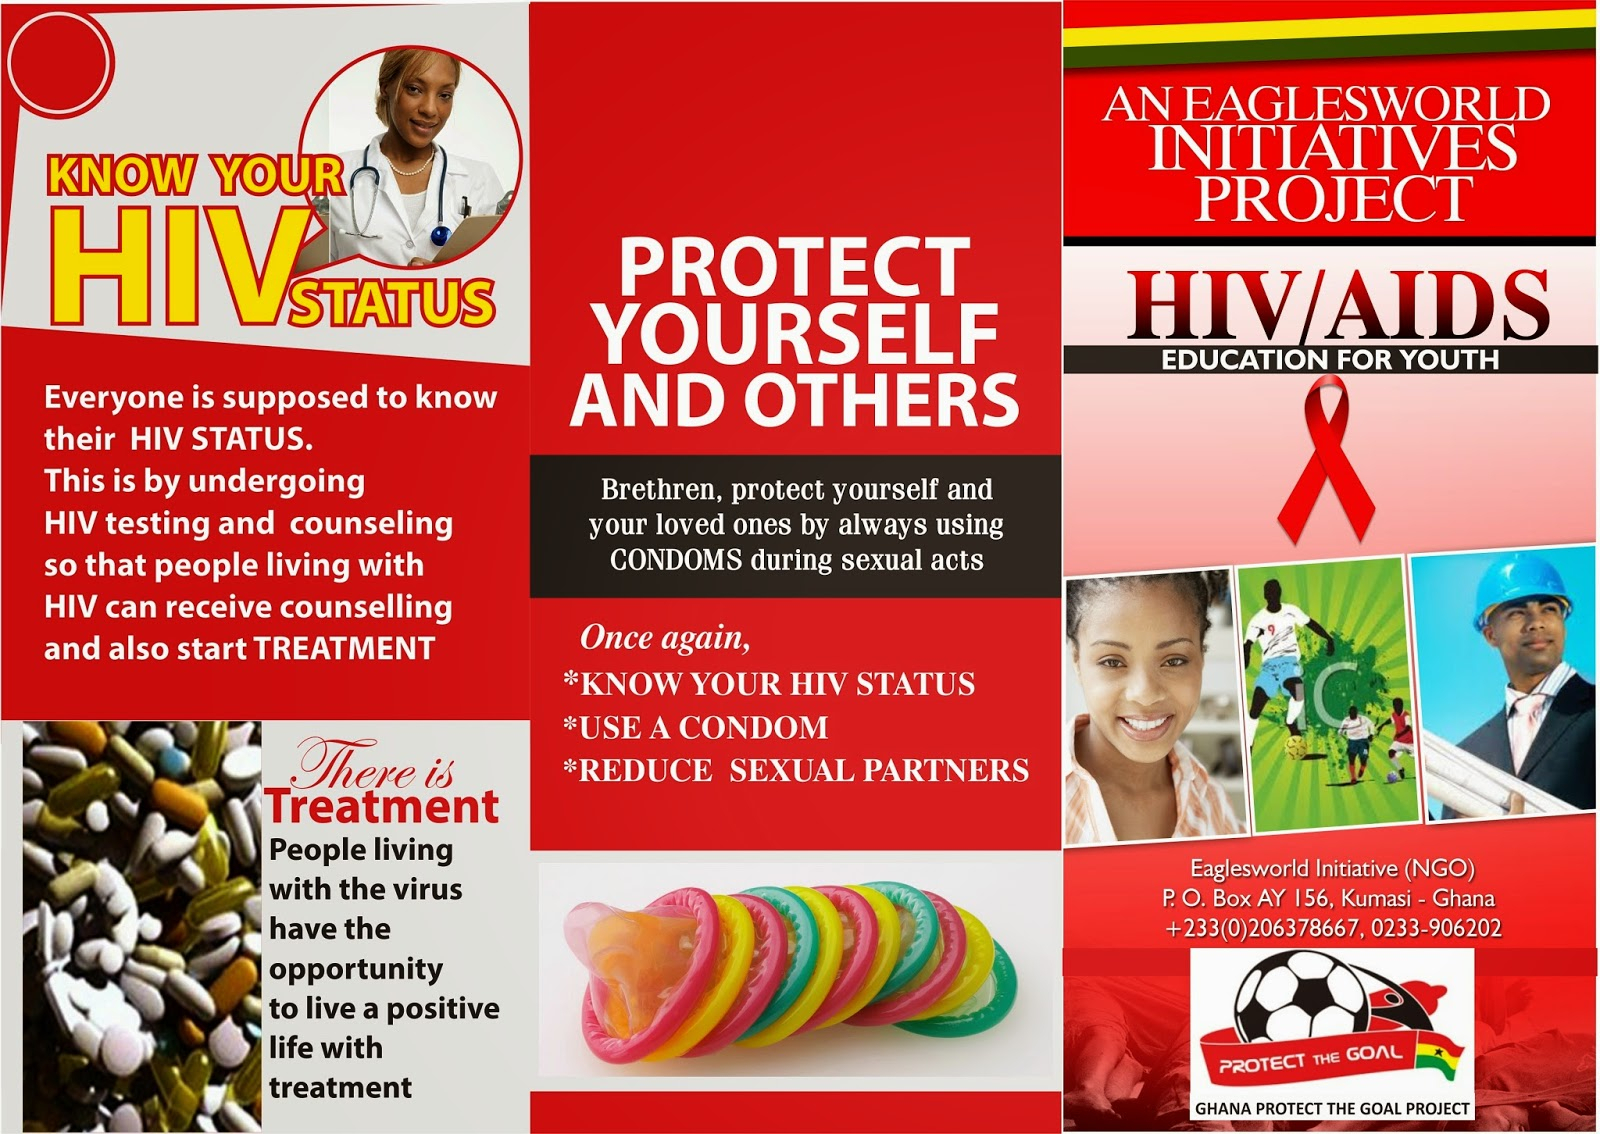 8 Best Photos Of Hiv Brochure Template - Hiv Aids Brochure With Hiv Aids Brochure Templates